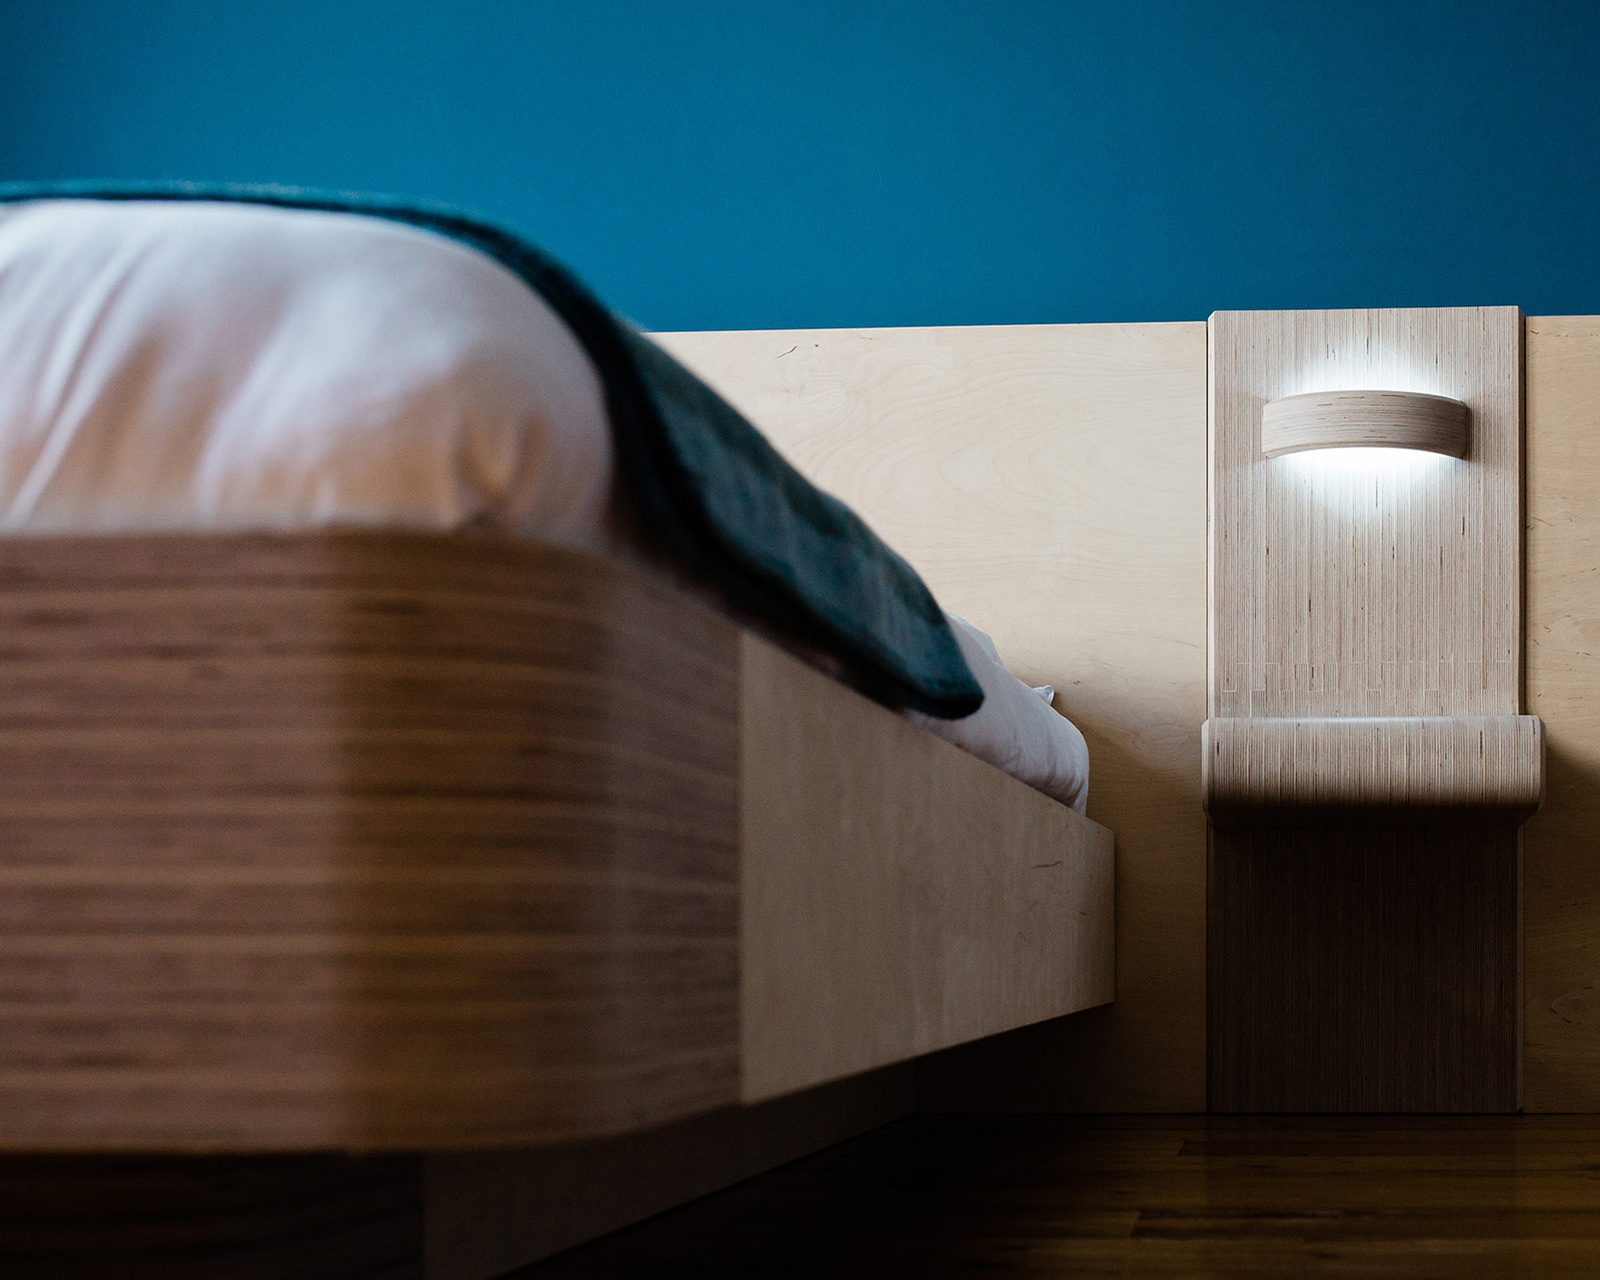 A modern wooden bed frame and attached bedside table in a room with blue walls and natural light illuminating the scene, crafted by a top Design Agency UK.